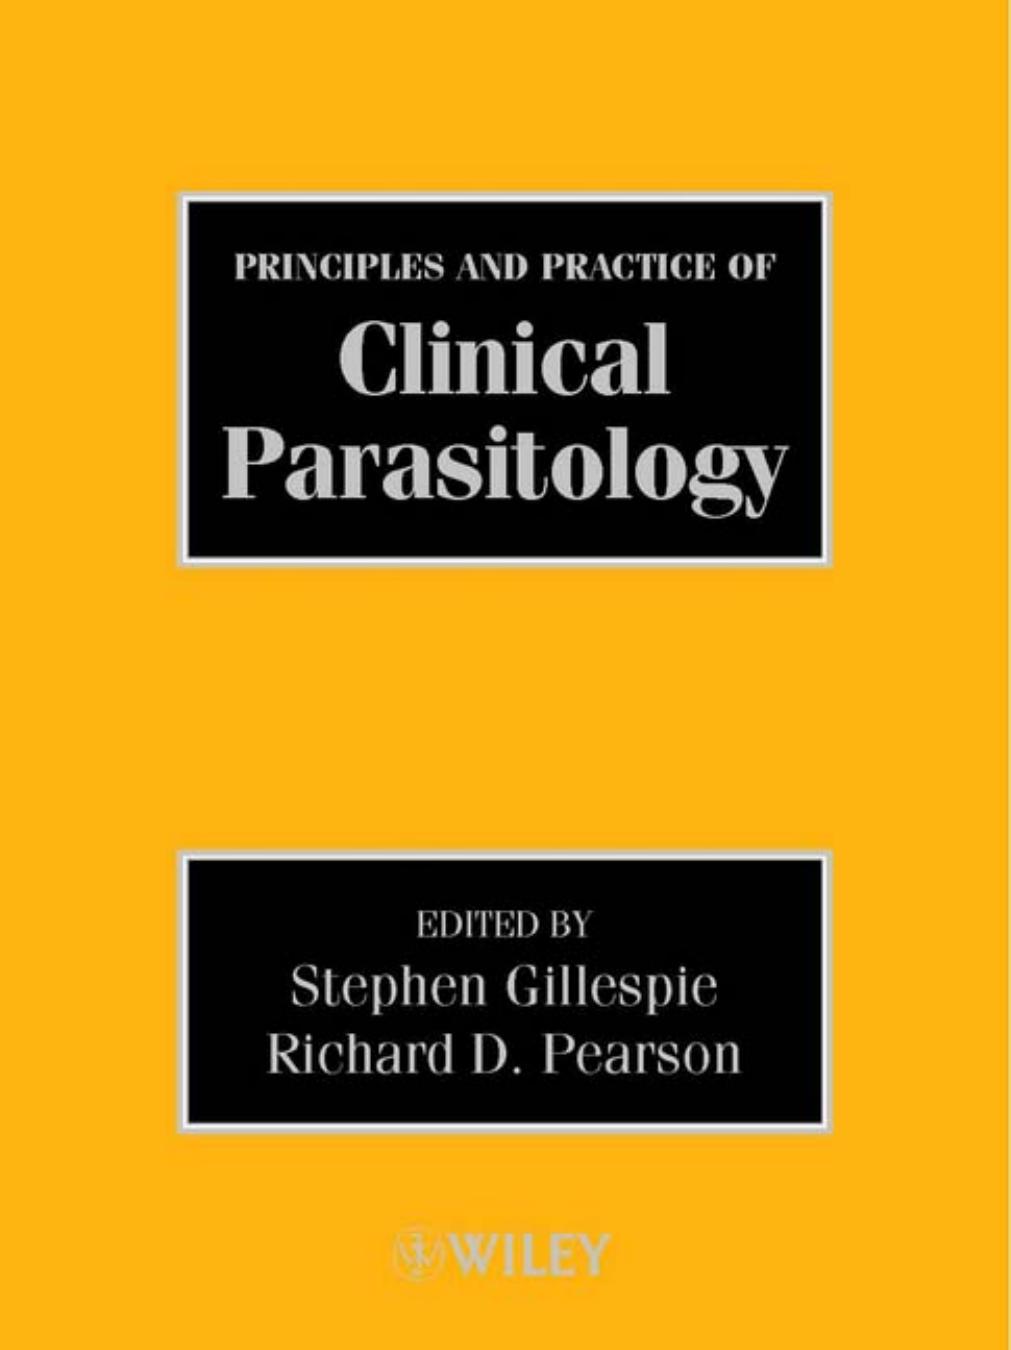 Principles and Practice of Clinical Parasitology 2001.pdf